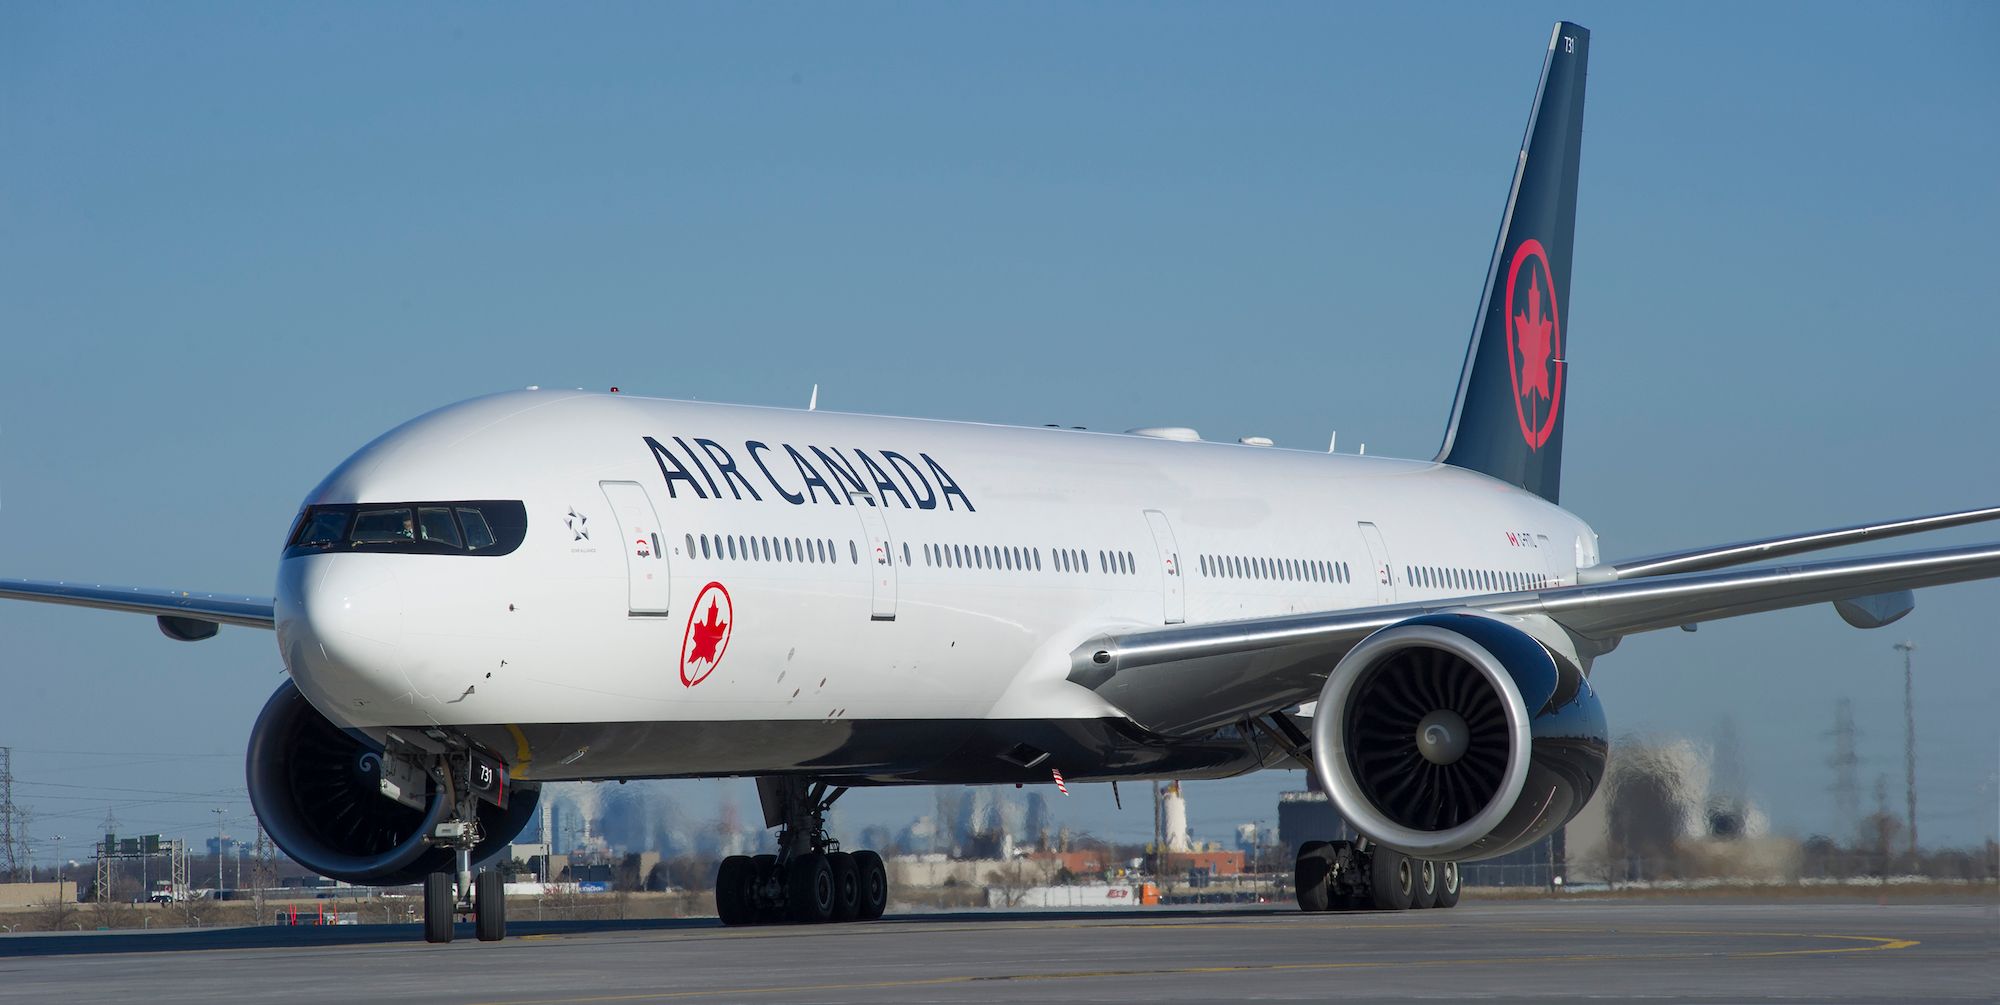 Air Canada boeing 777-300ER on the ground